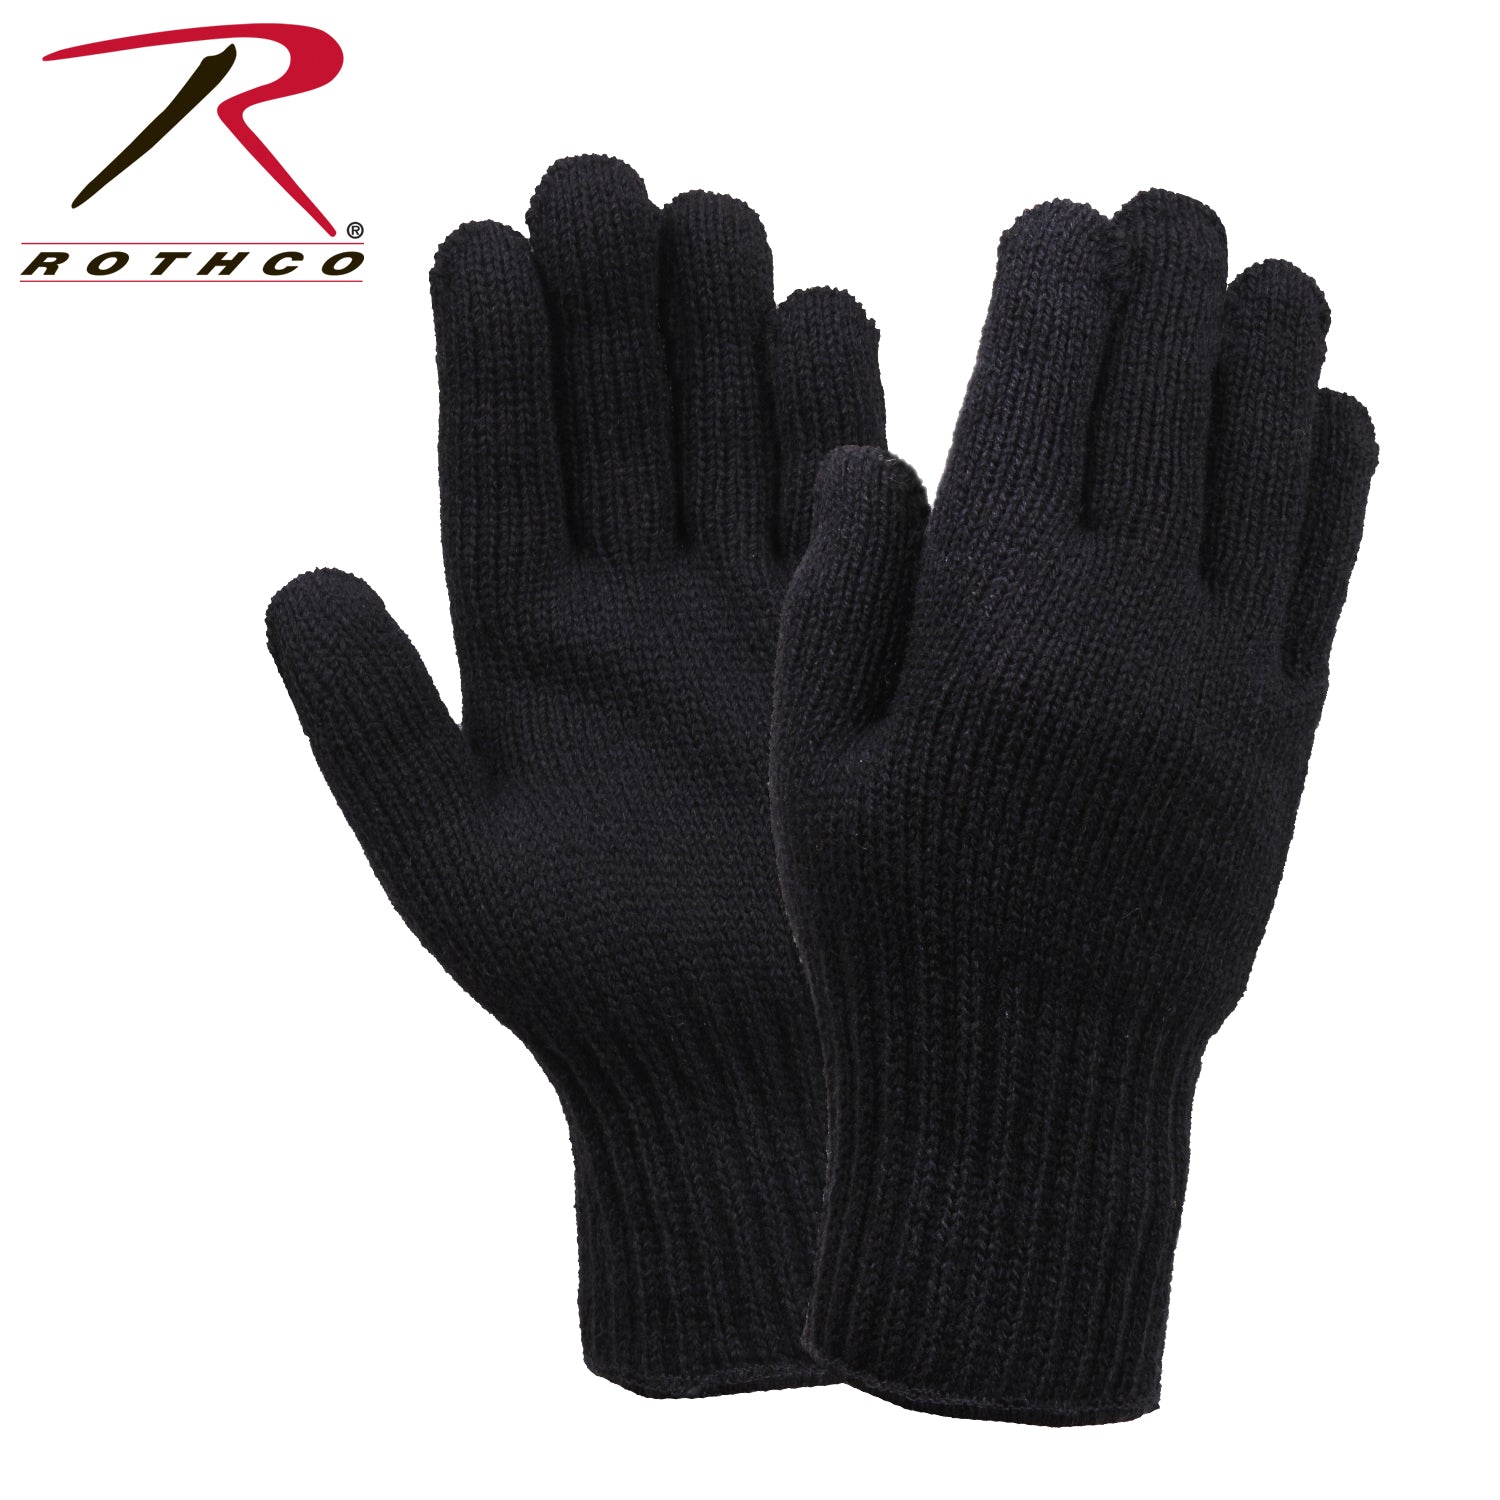 Milspec G.I. Glove Liners Gifts For Him MilTac Tactical Military Outdoor Gear Australia